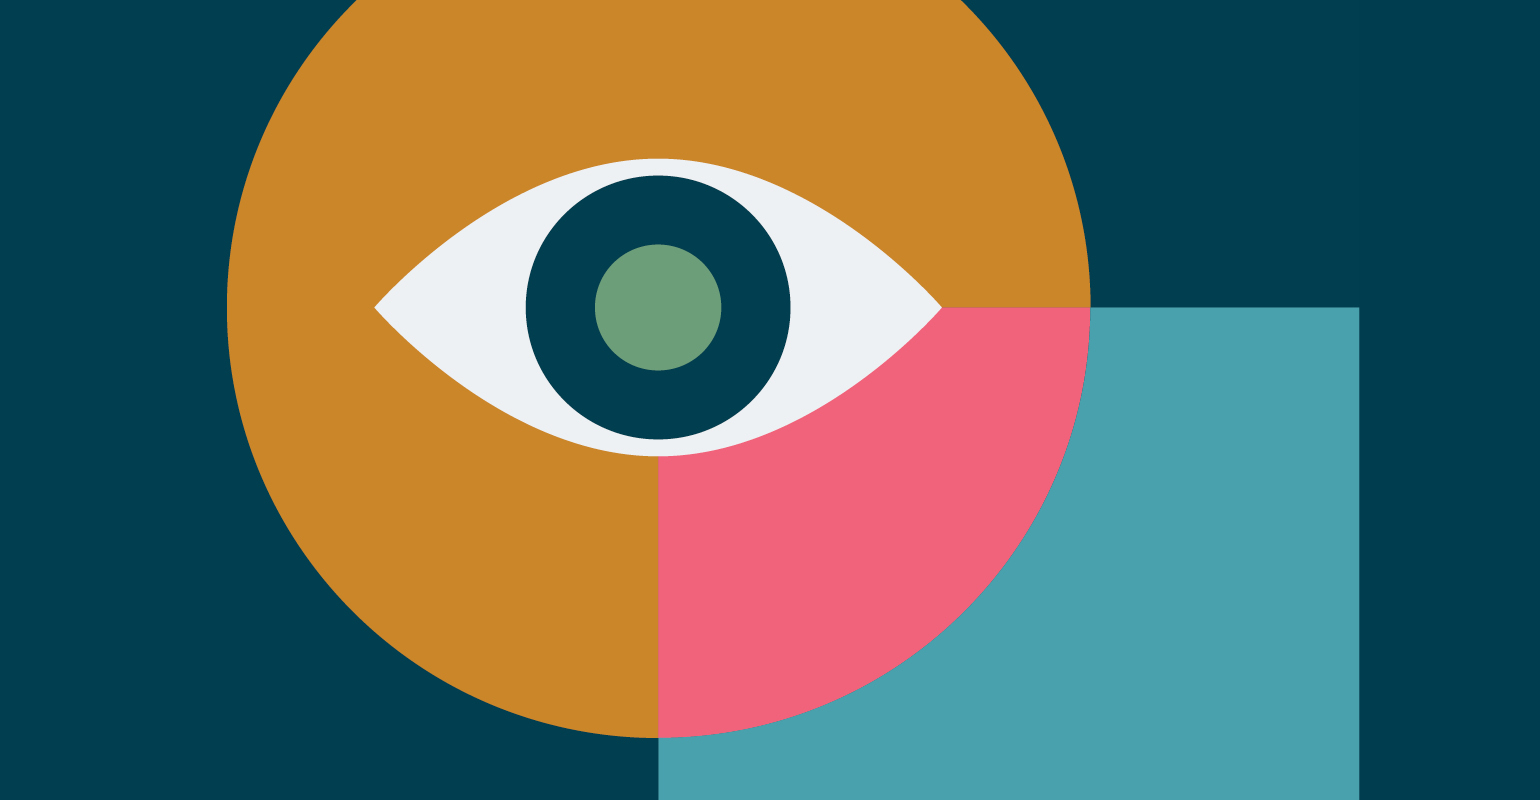 Illustration of an eye over a dark blue background with gemetrical shapes in yellow, pink and blue